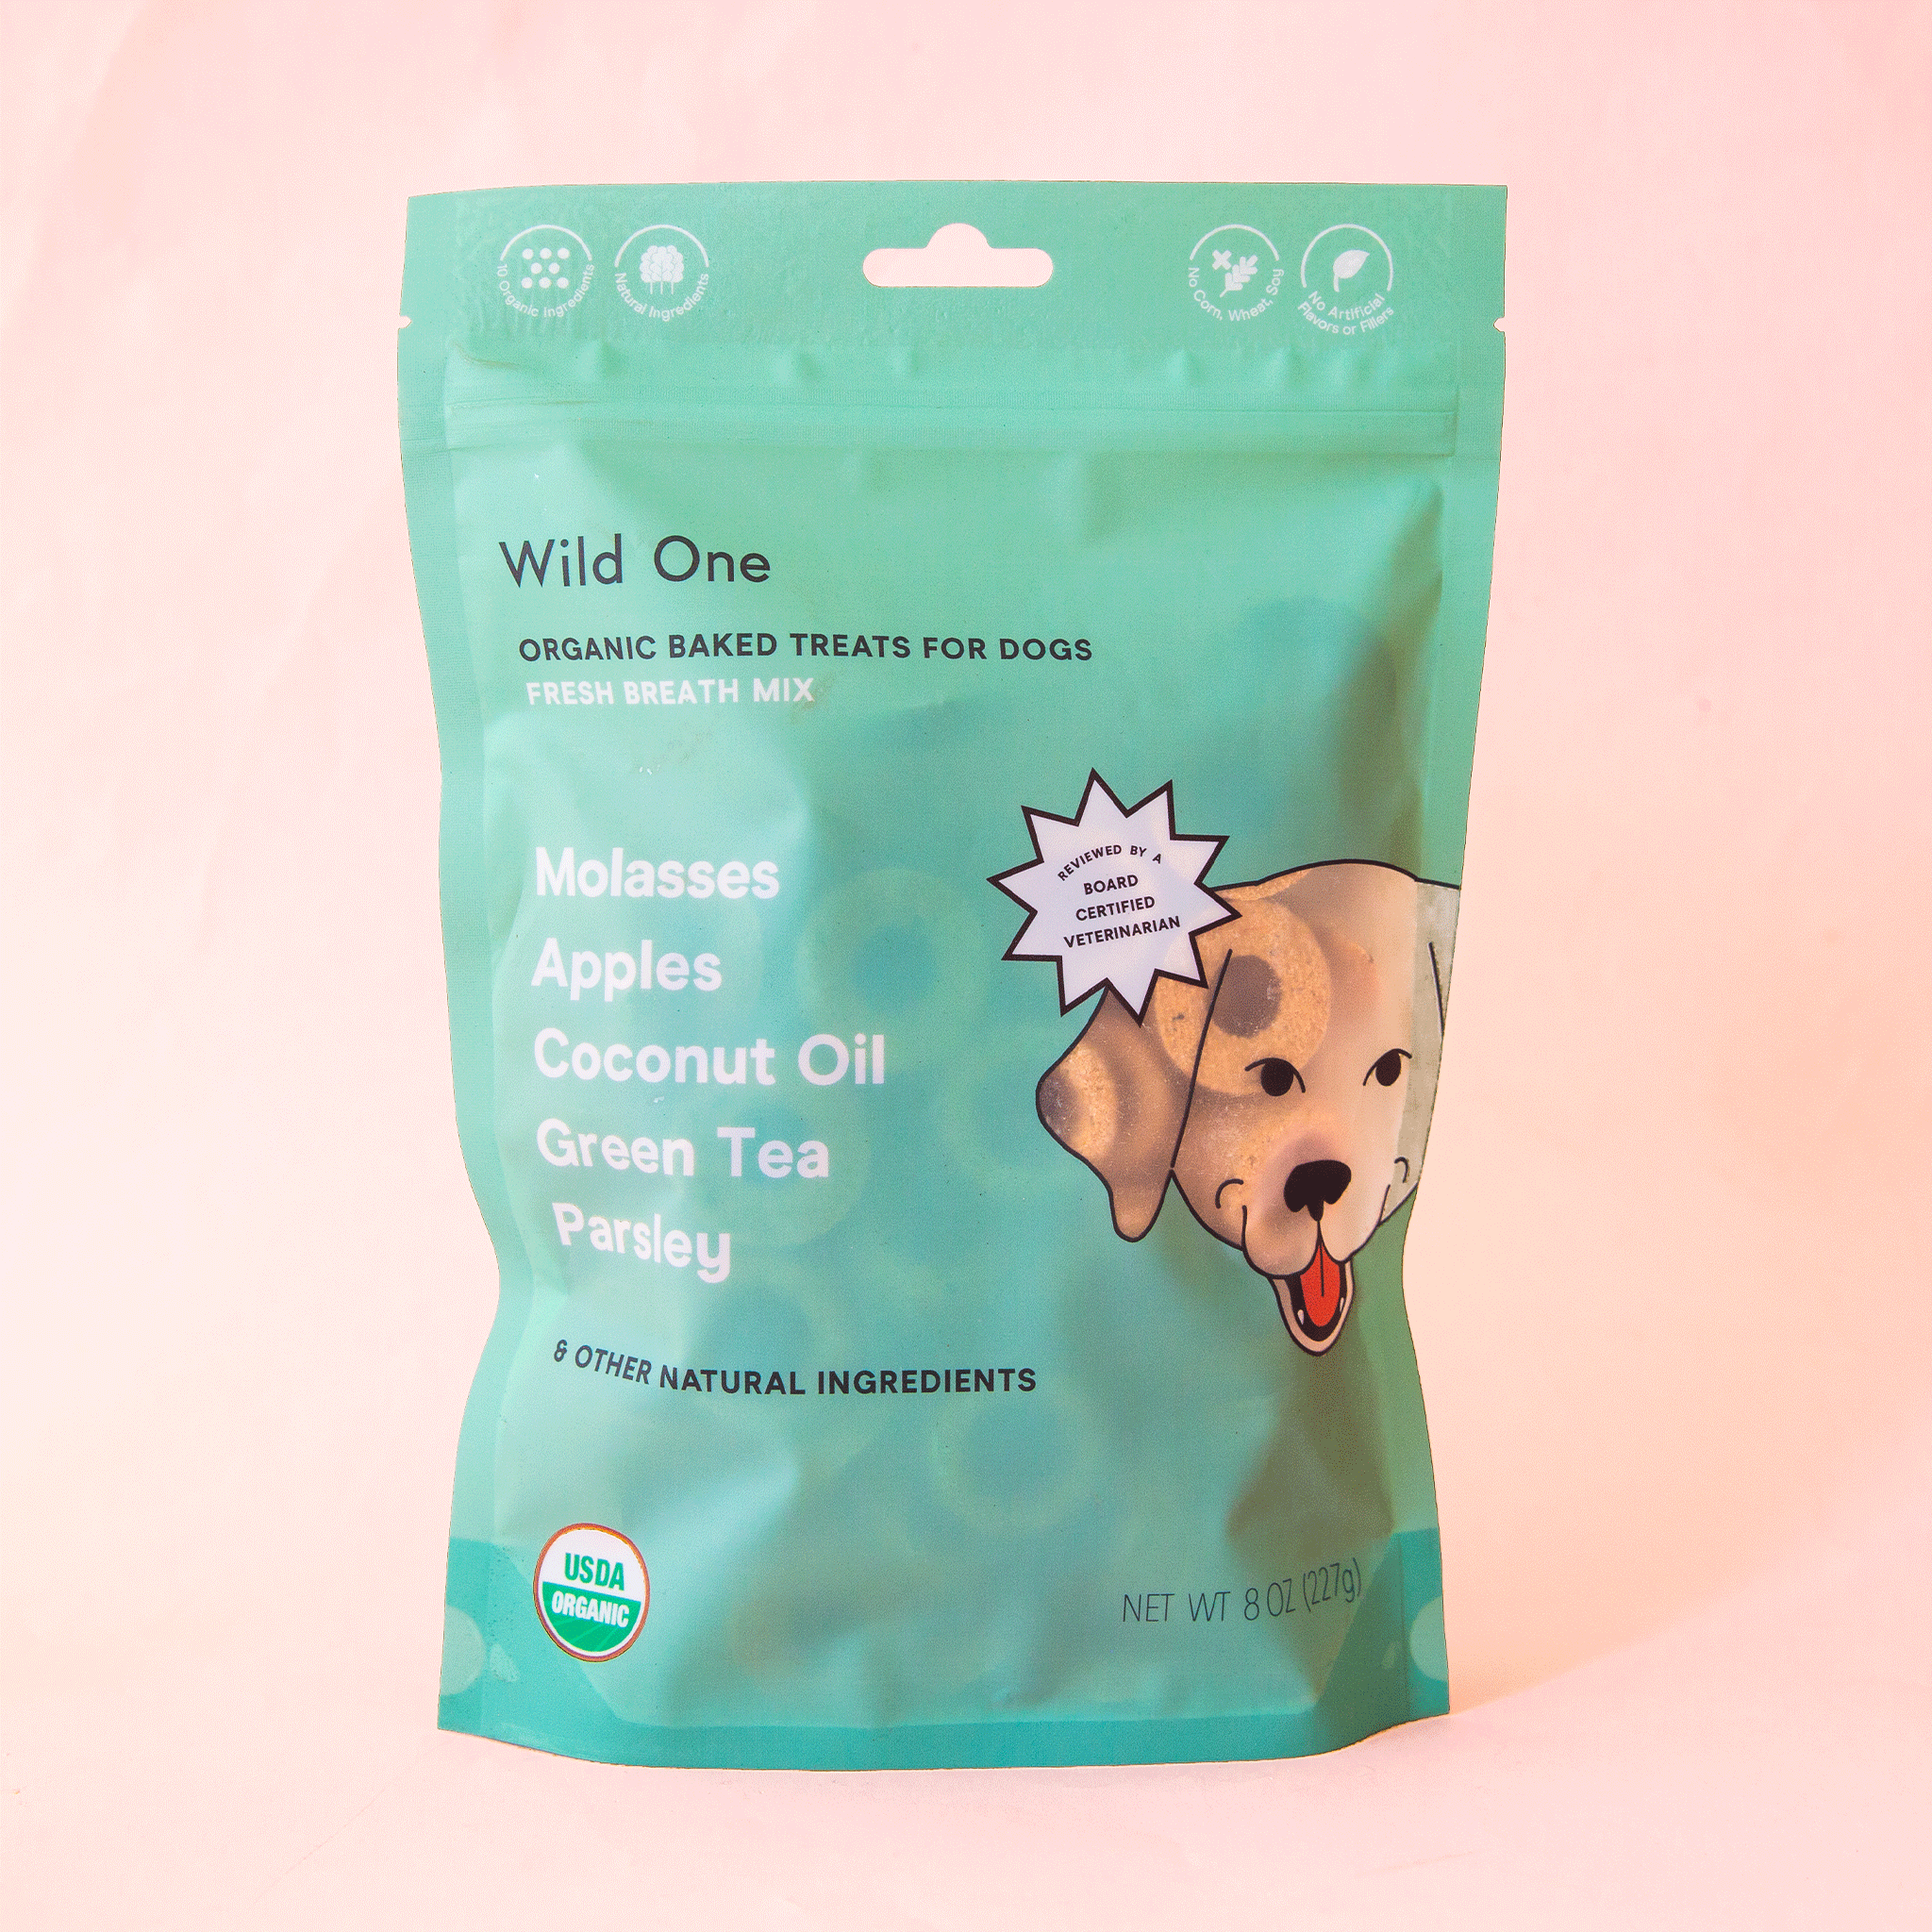 On a peach background is a green bag of dog treats with a dog graphic and text that reads, "Wild One Organic Baked Treats For Dogs".